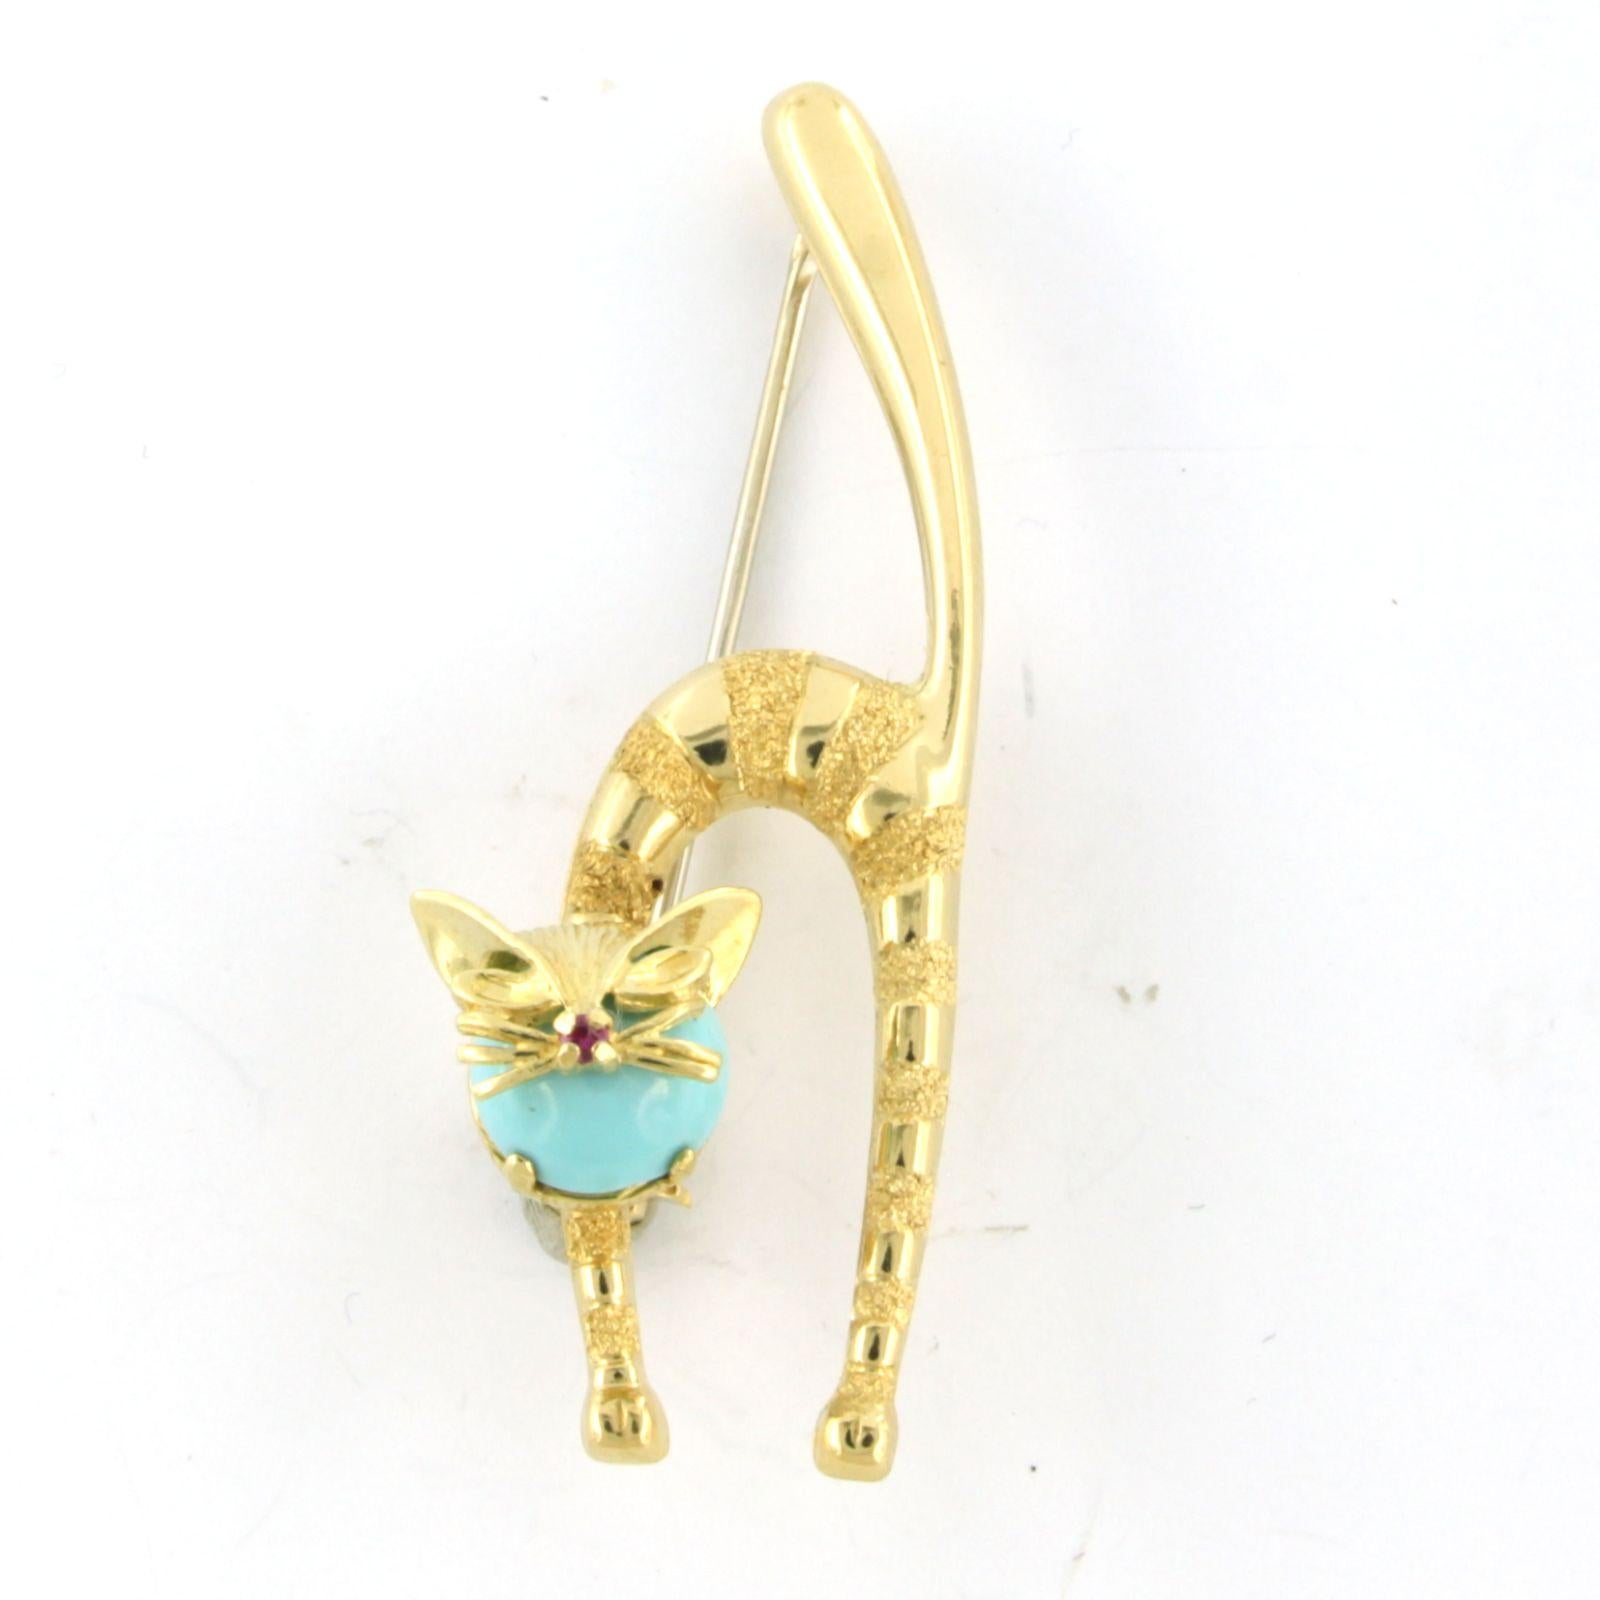 Brooch with Ruby and turquoise in shape of a cat 18k yellow gold